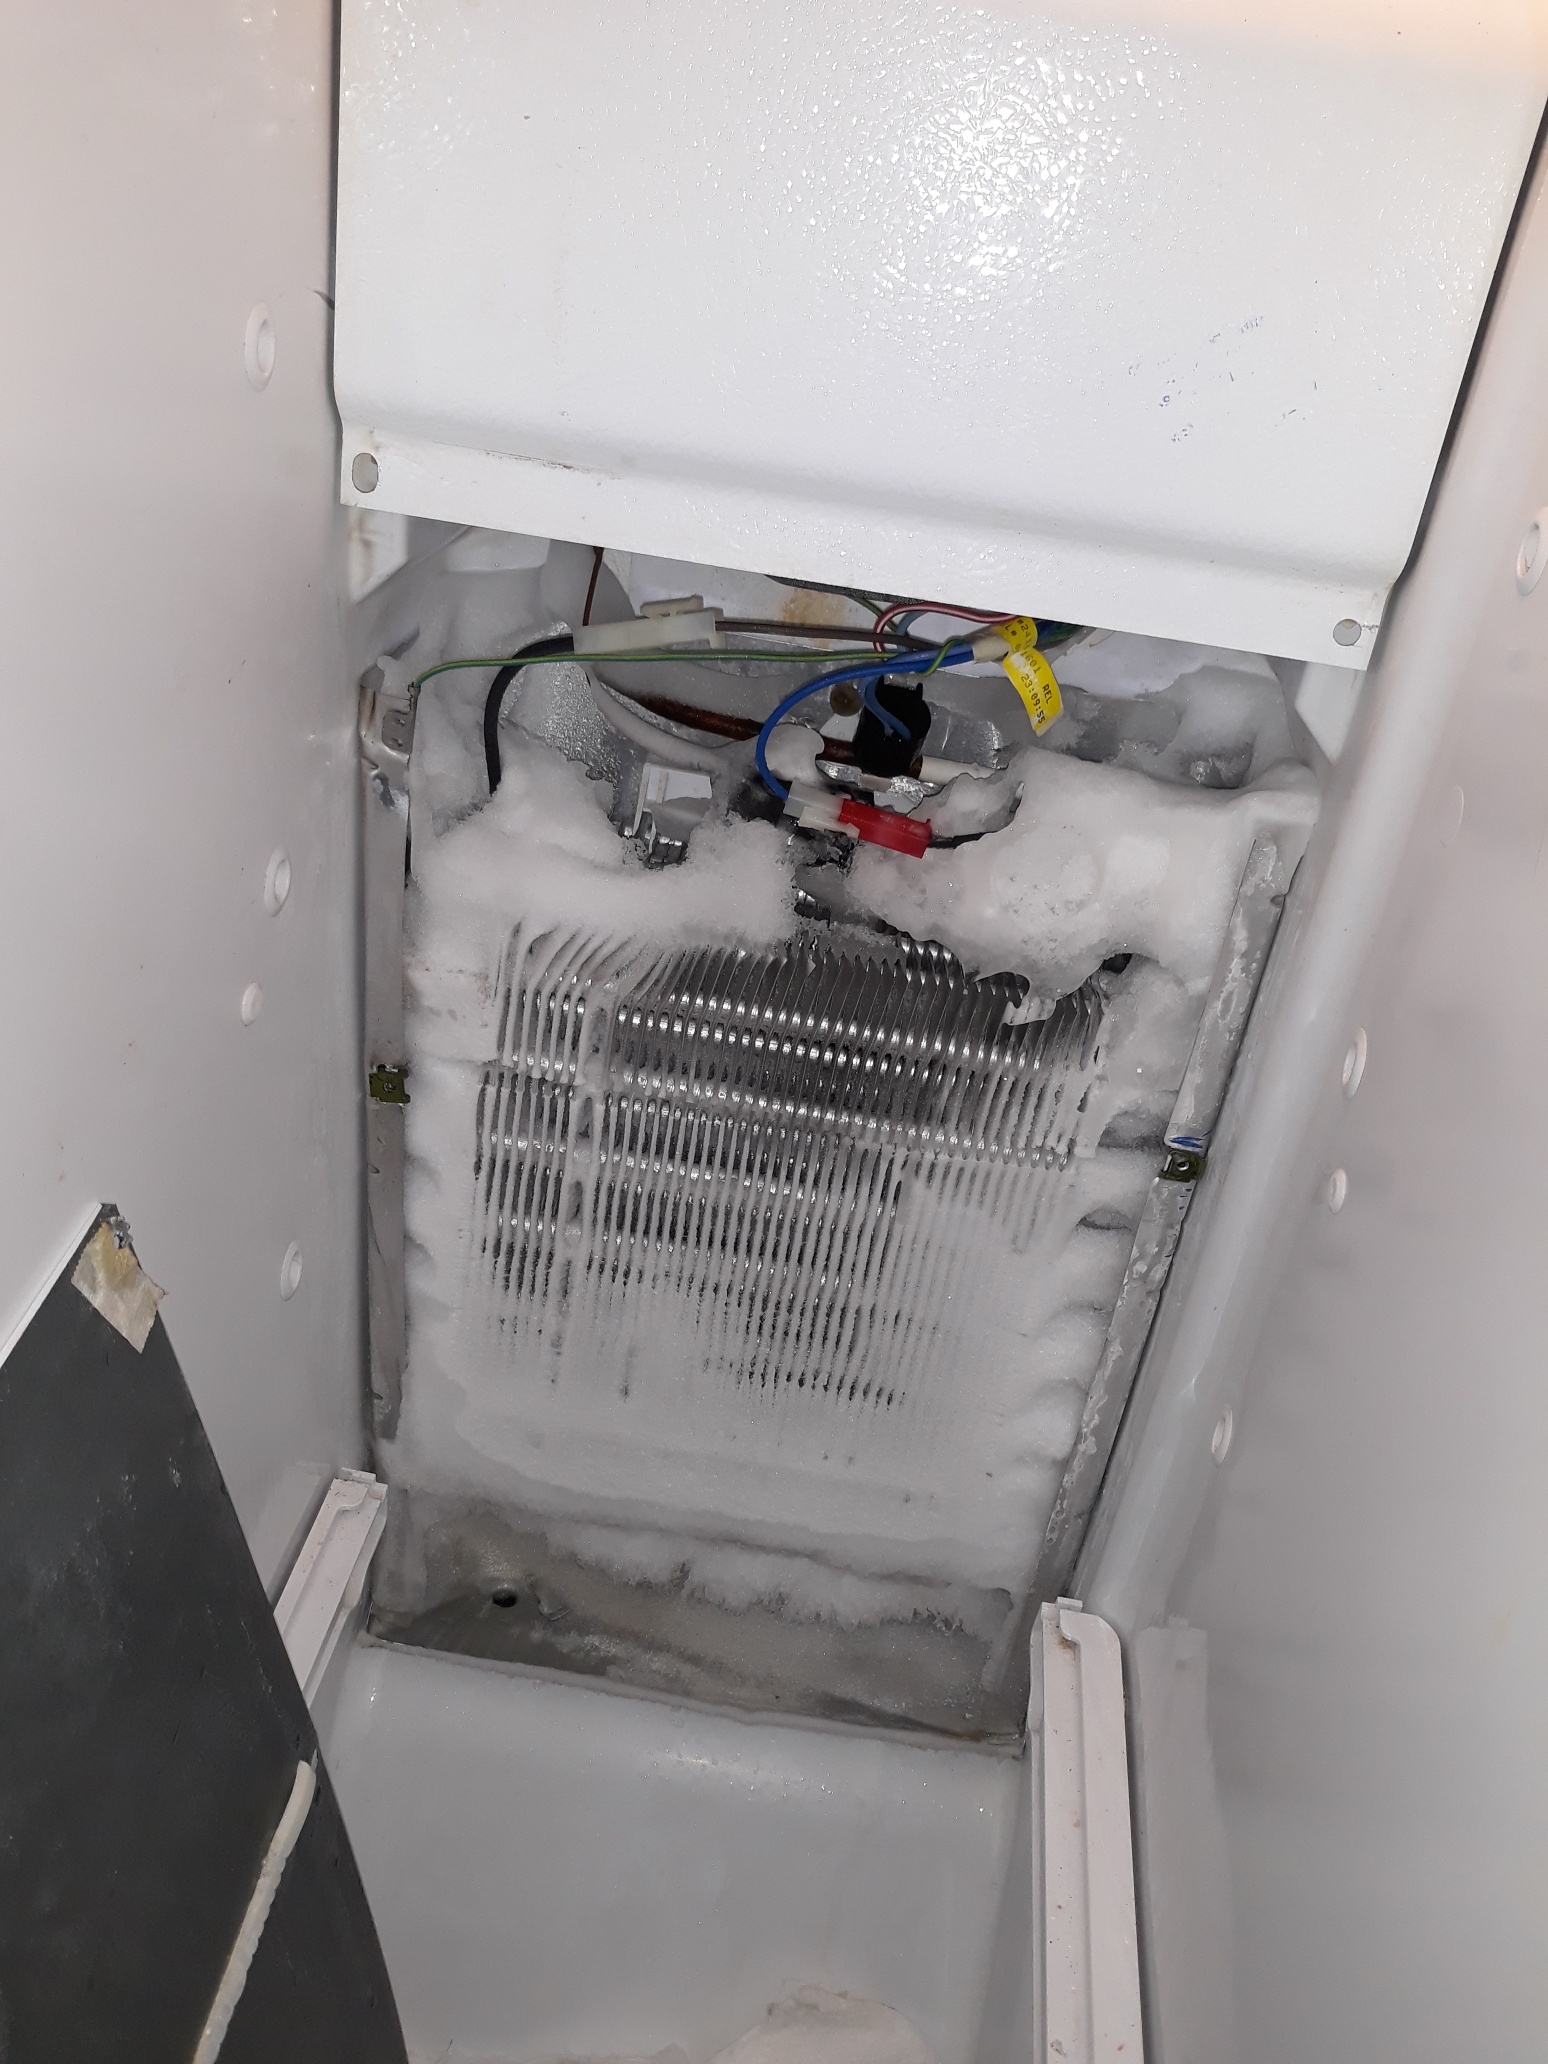 appliance repair refrigerator repair repaired by replacement of the failed hi-limit safety switch assembly se 84th foxgrove ave the villages fl 32162